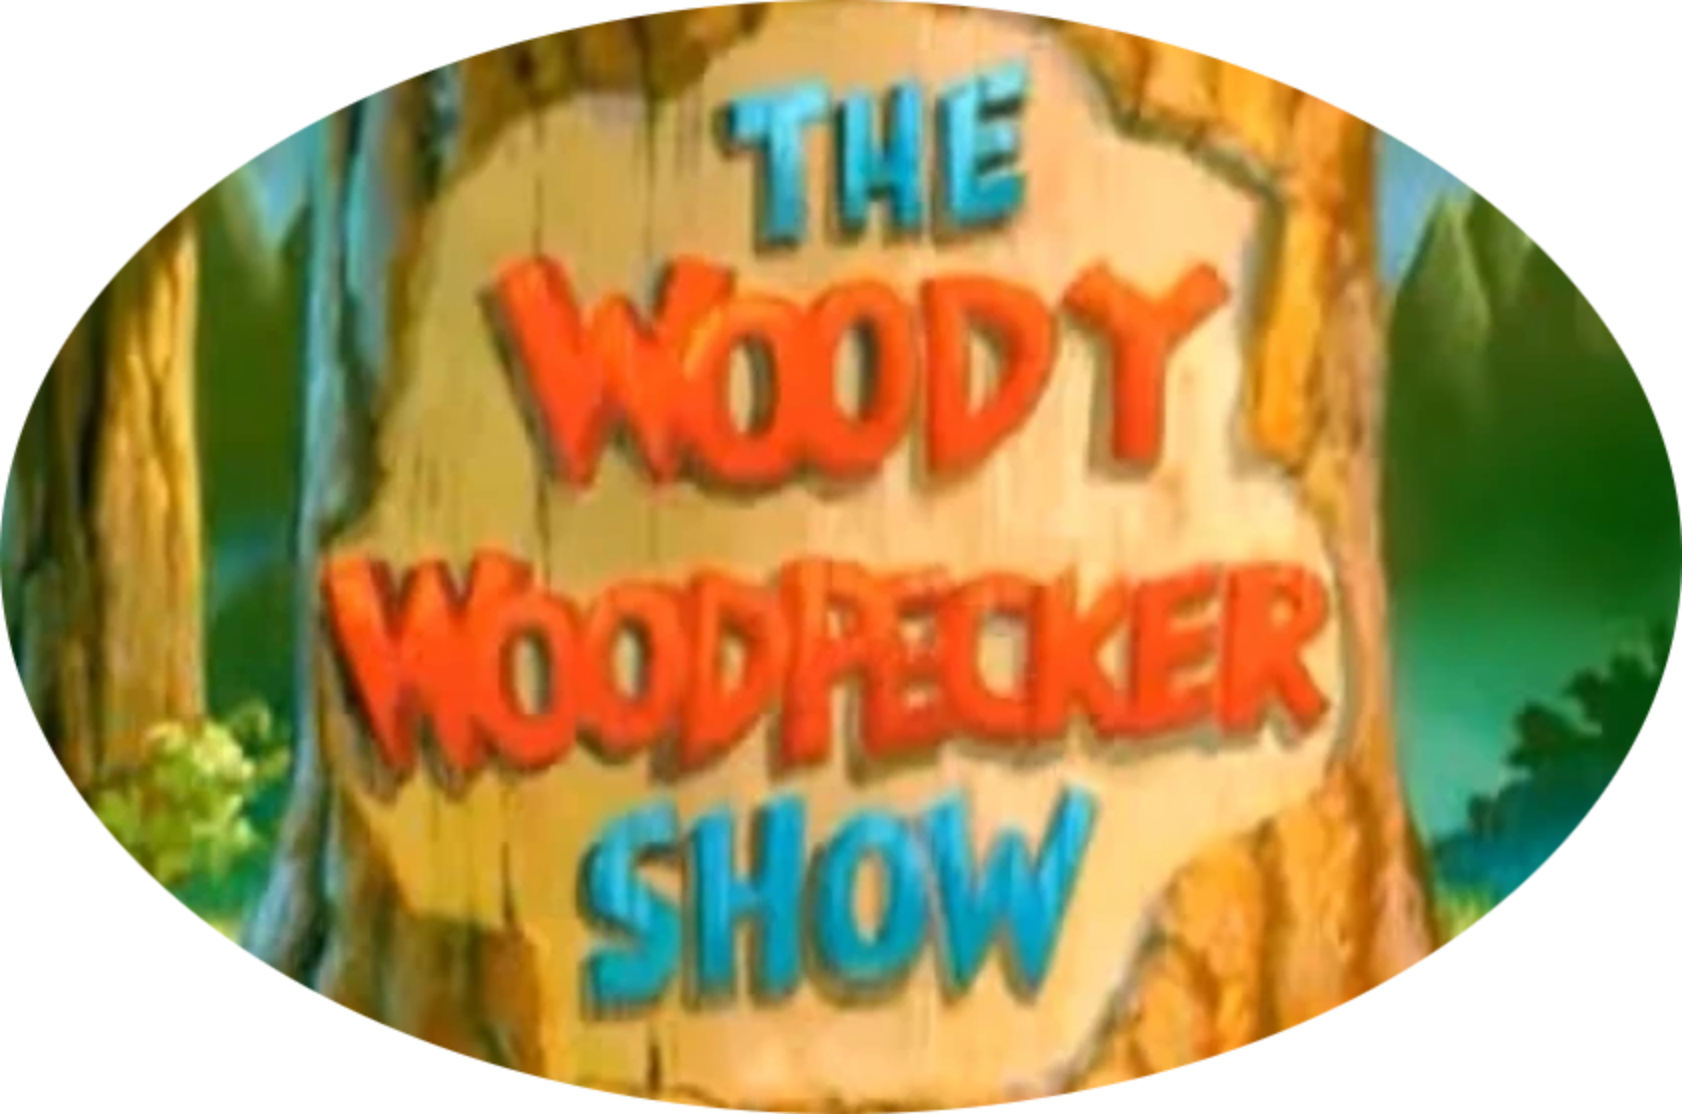 The New Woody Woodpecker Show Complete (1 DVD Box Set)